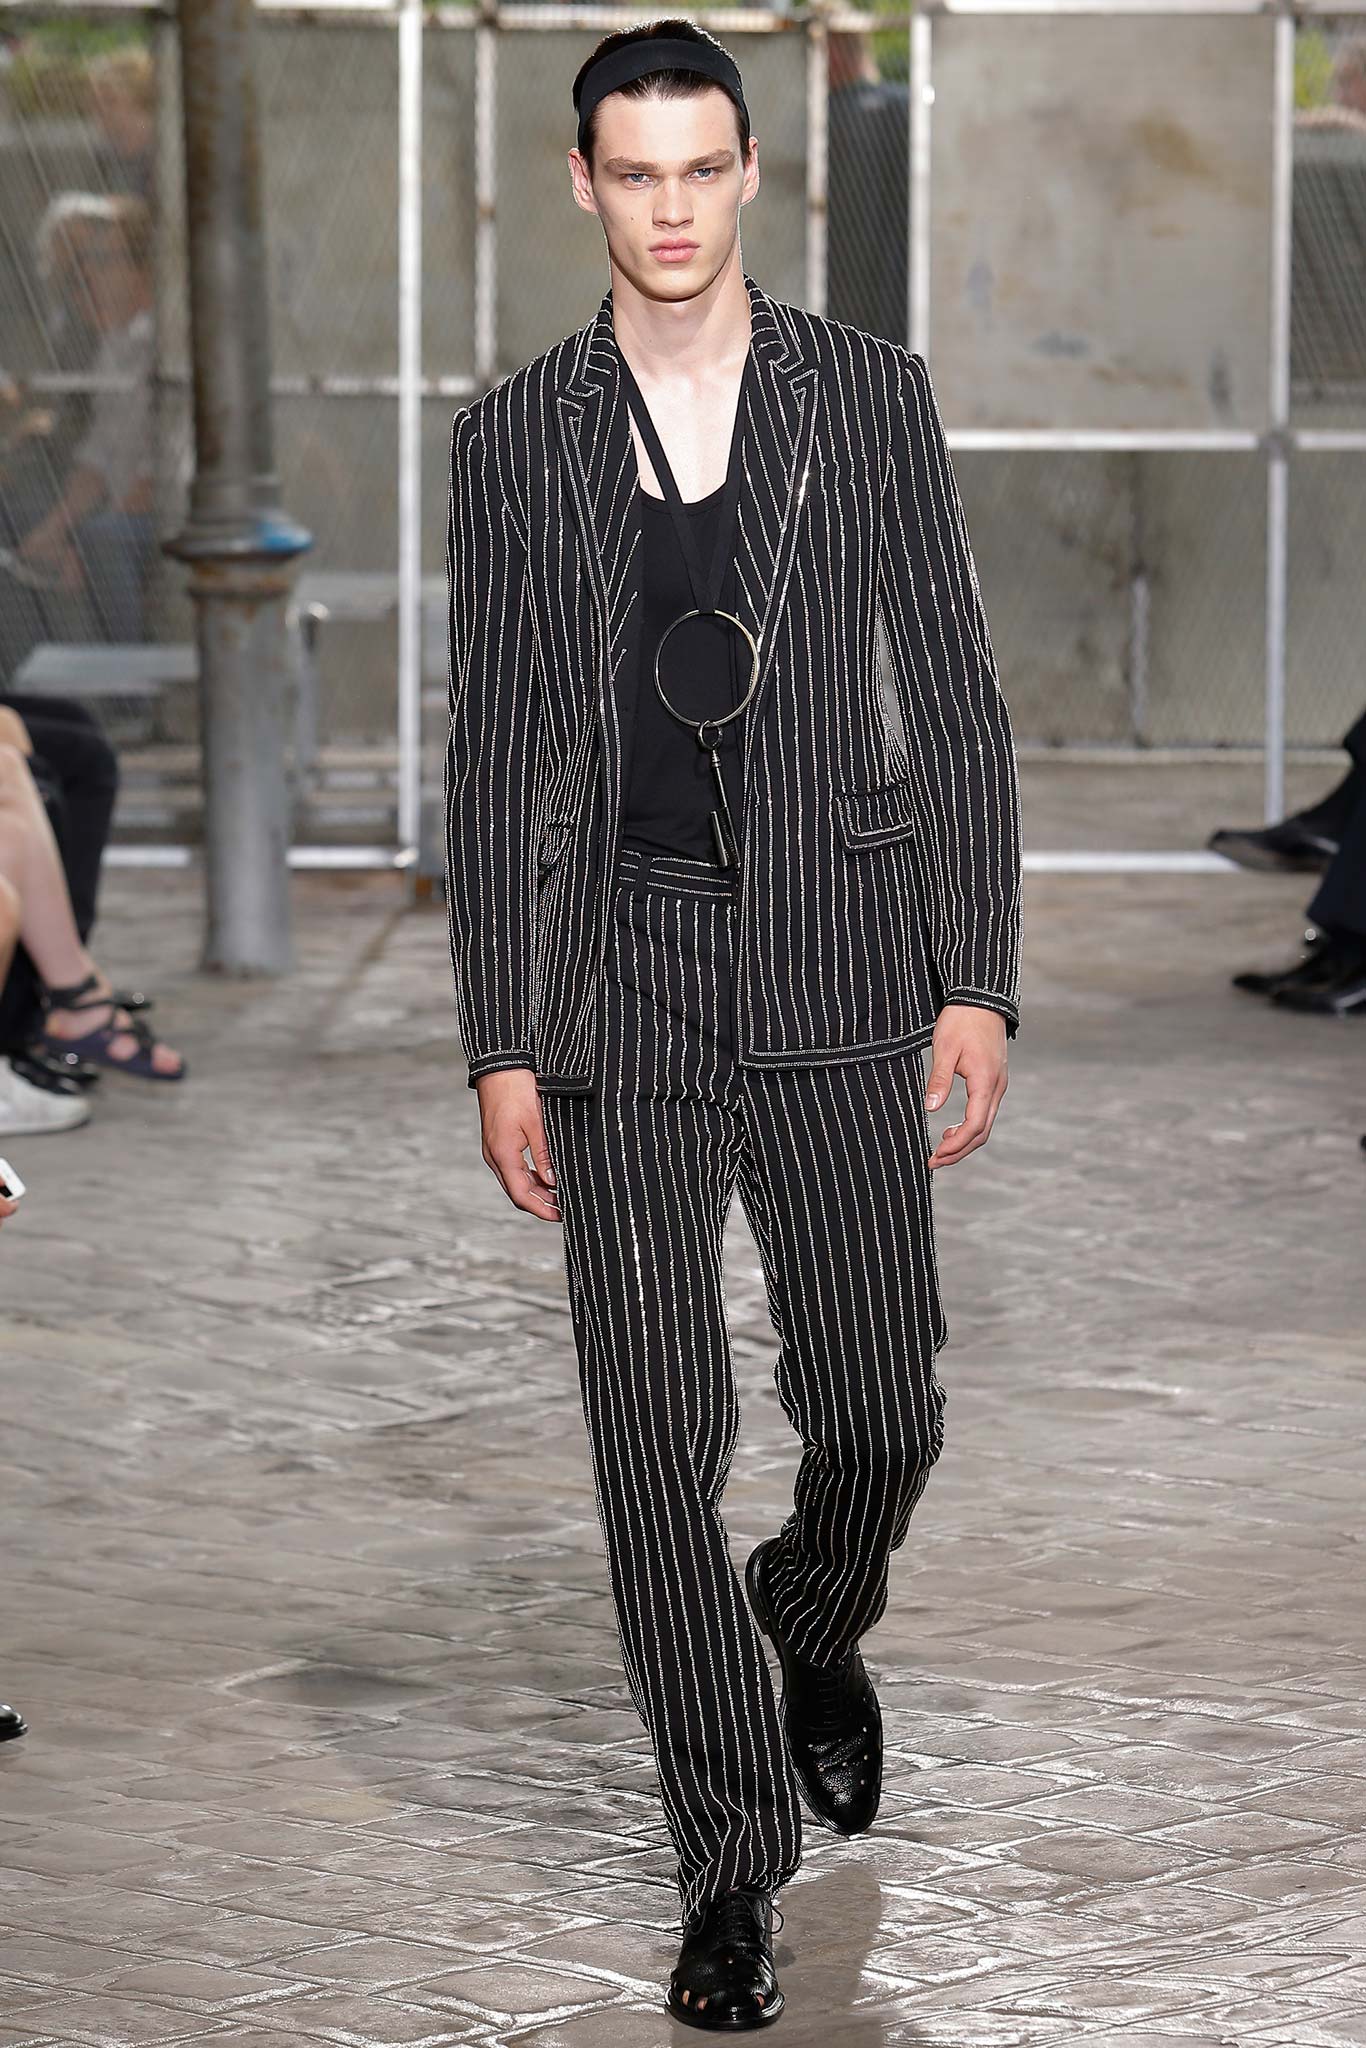 spring-2016-menswear-trends-04-long-striped-suits-05